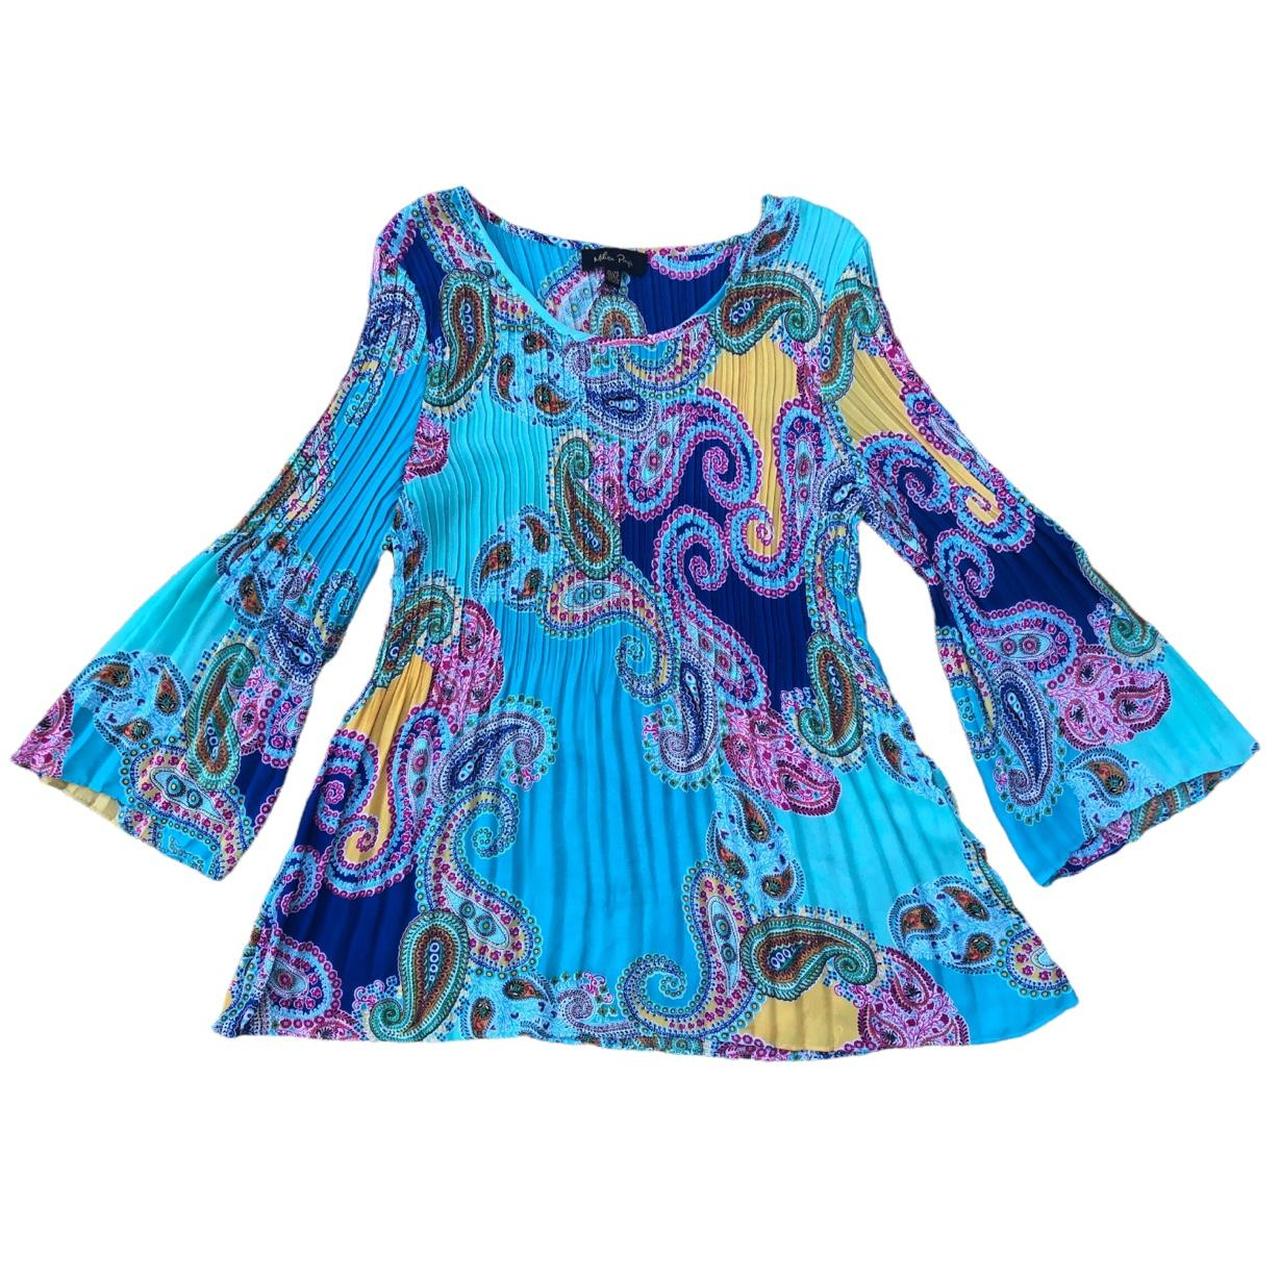 Product Image 1 - Pretty Paisley Print Tunic Top

Ribbed